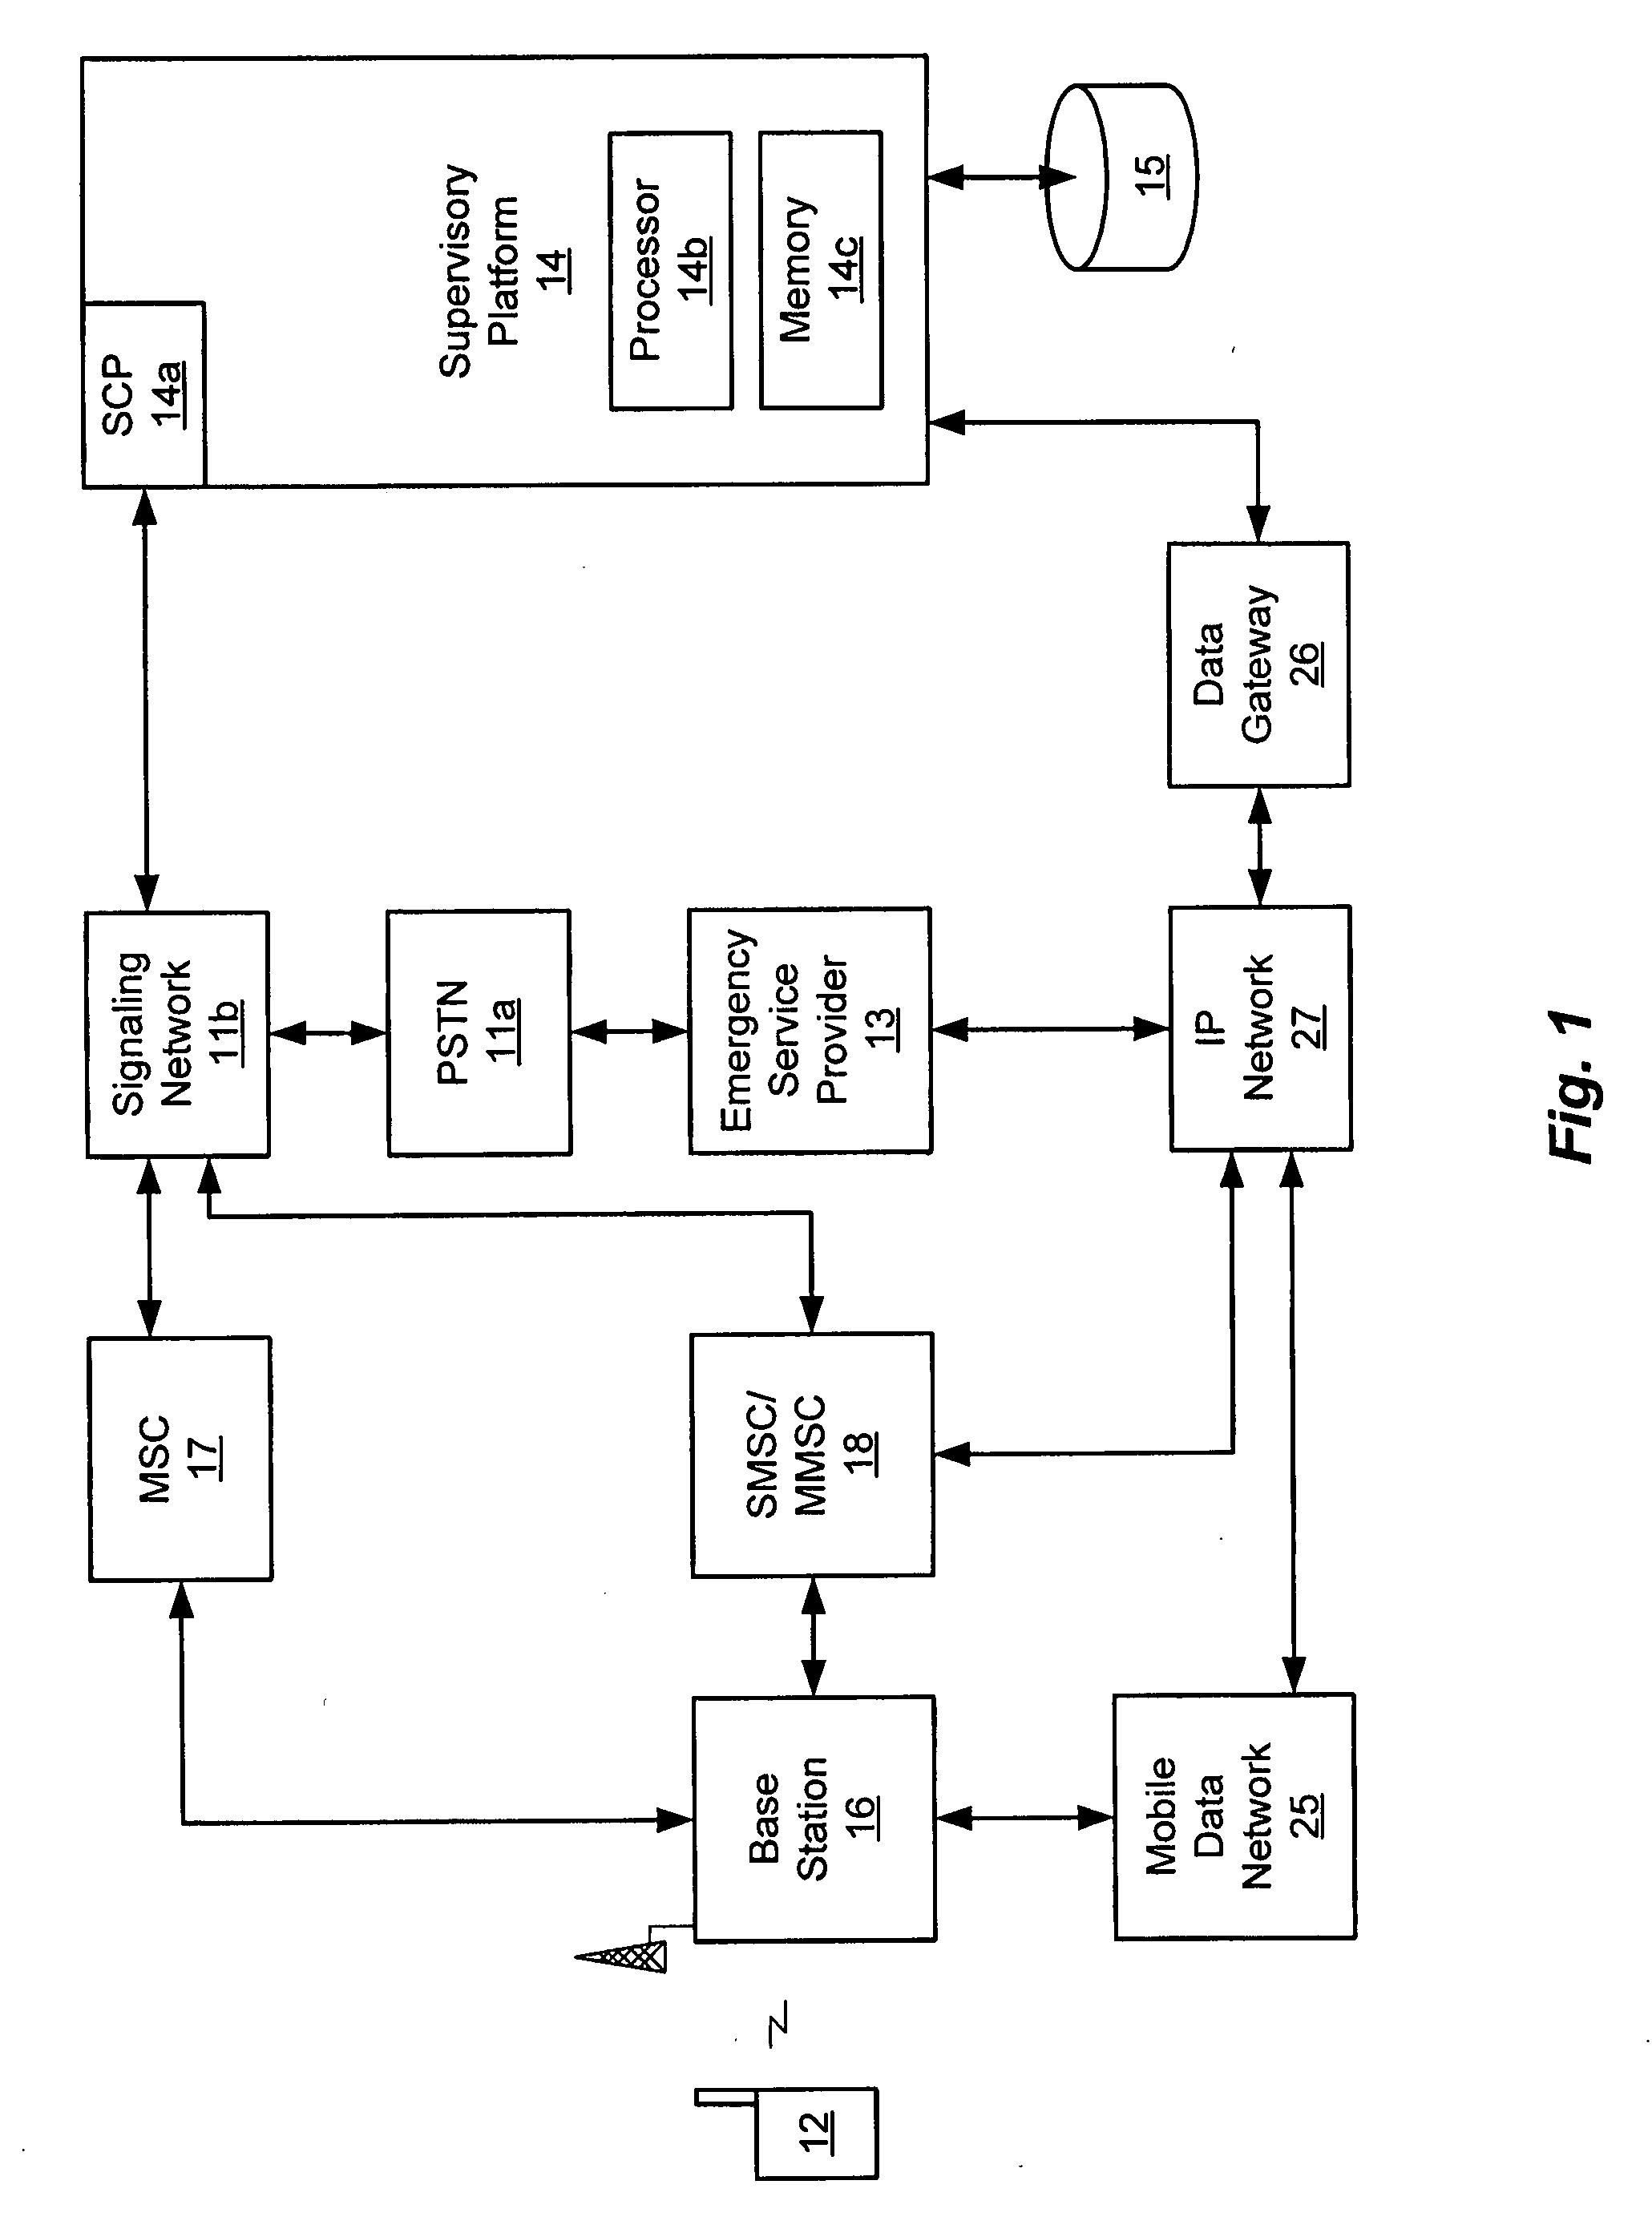 Emergency service provision for a supervised wireless device